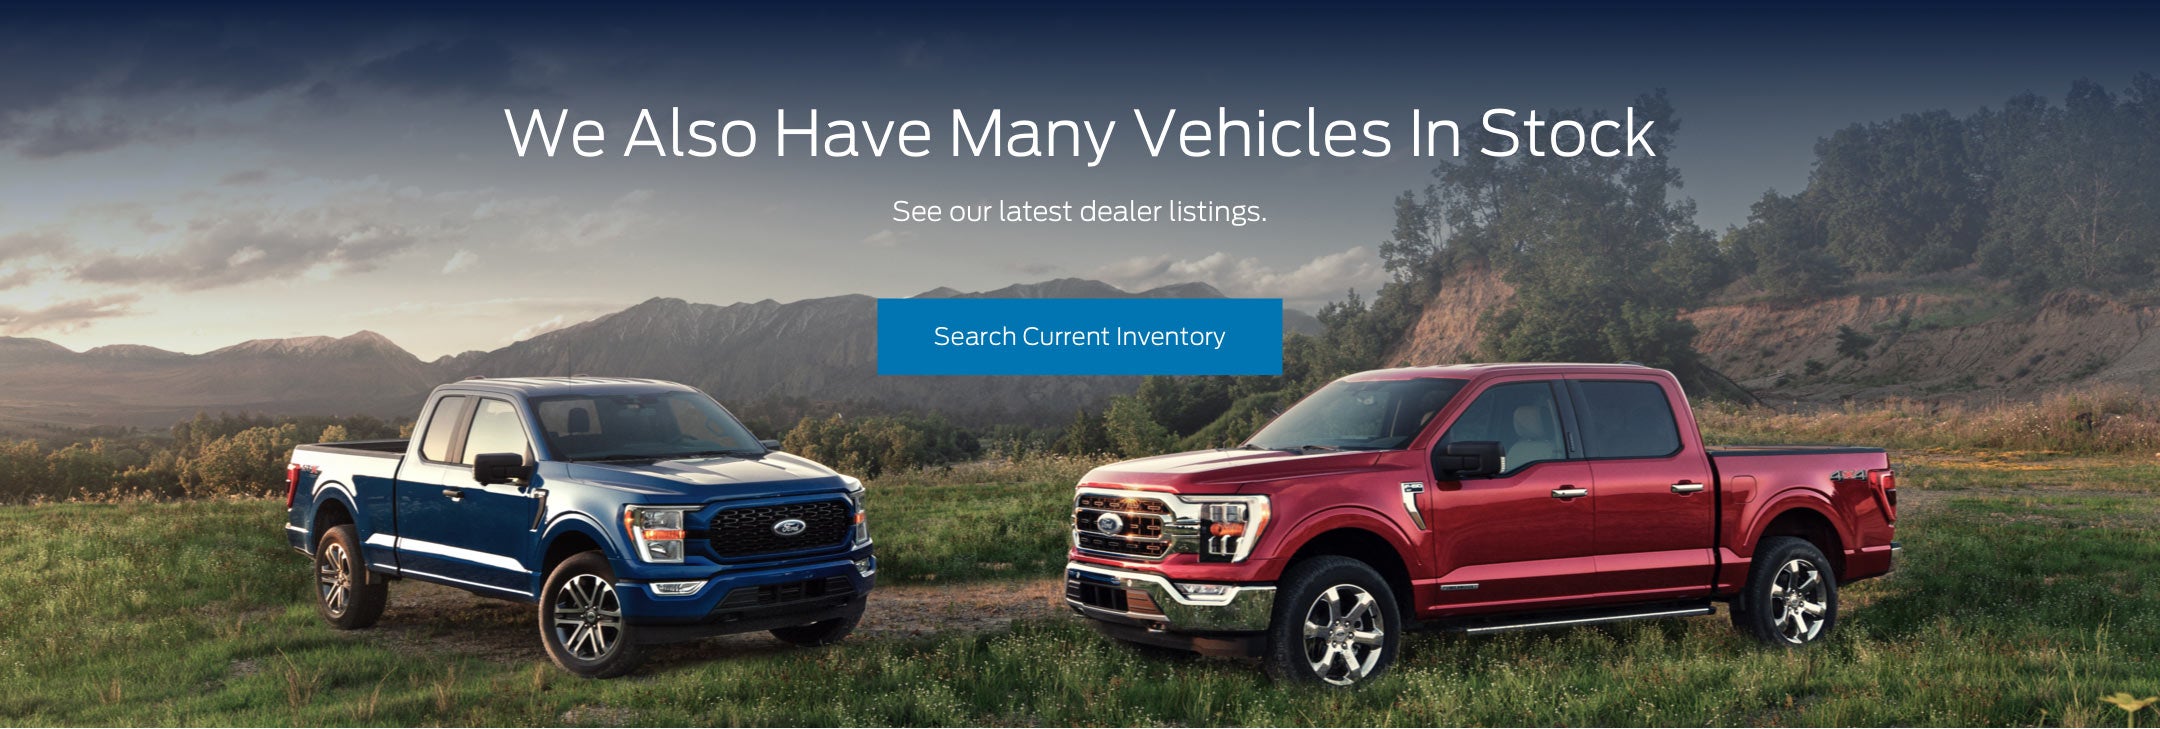 Ford vehicles in stock | Capital Ford of Wilmington in Wilmington NC